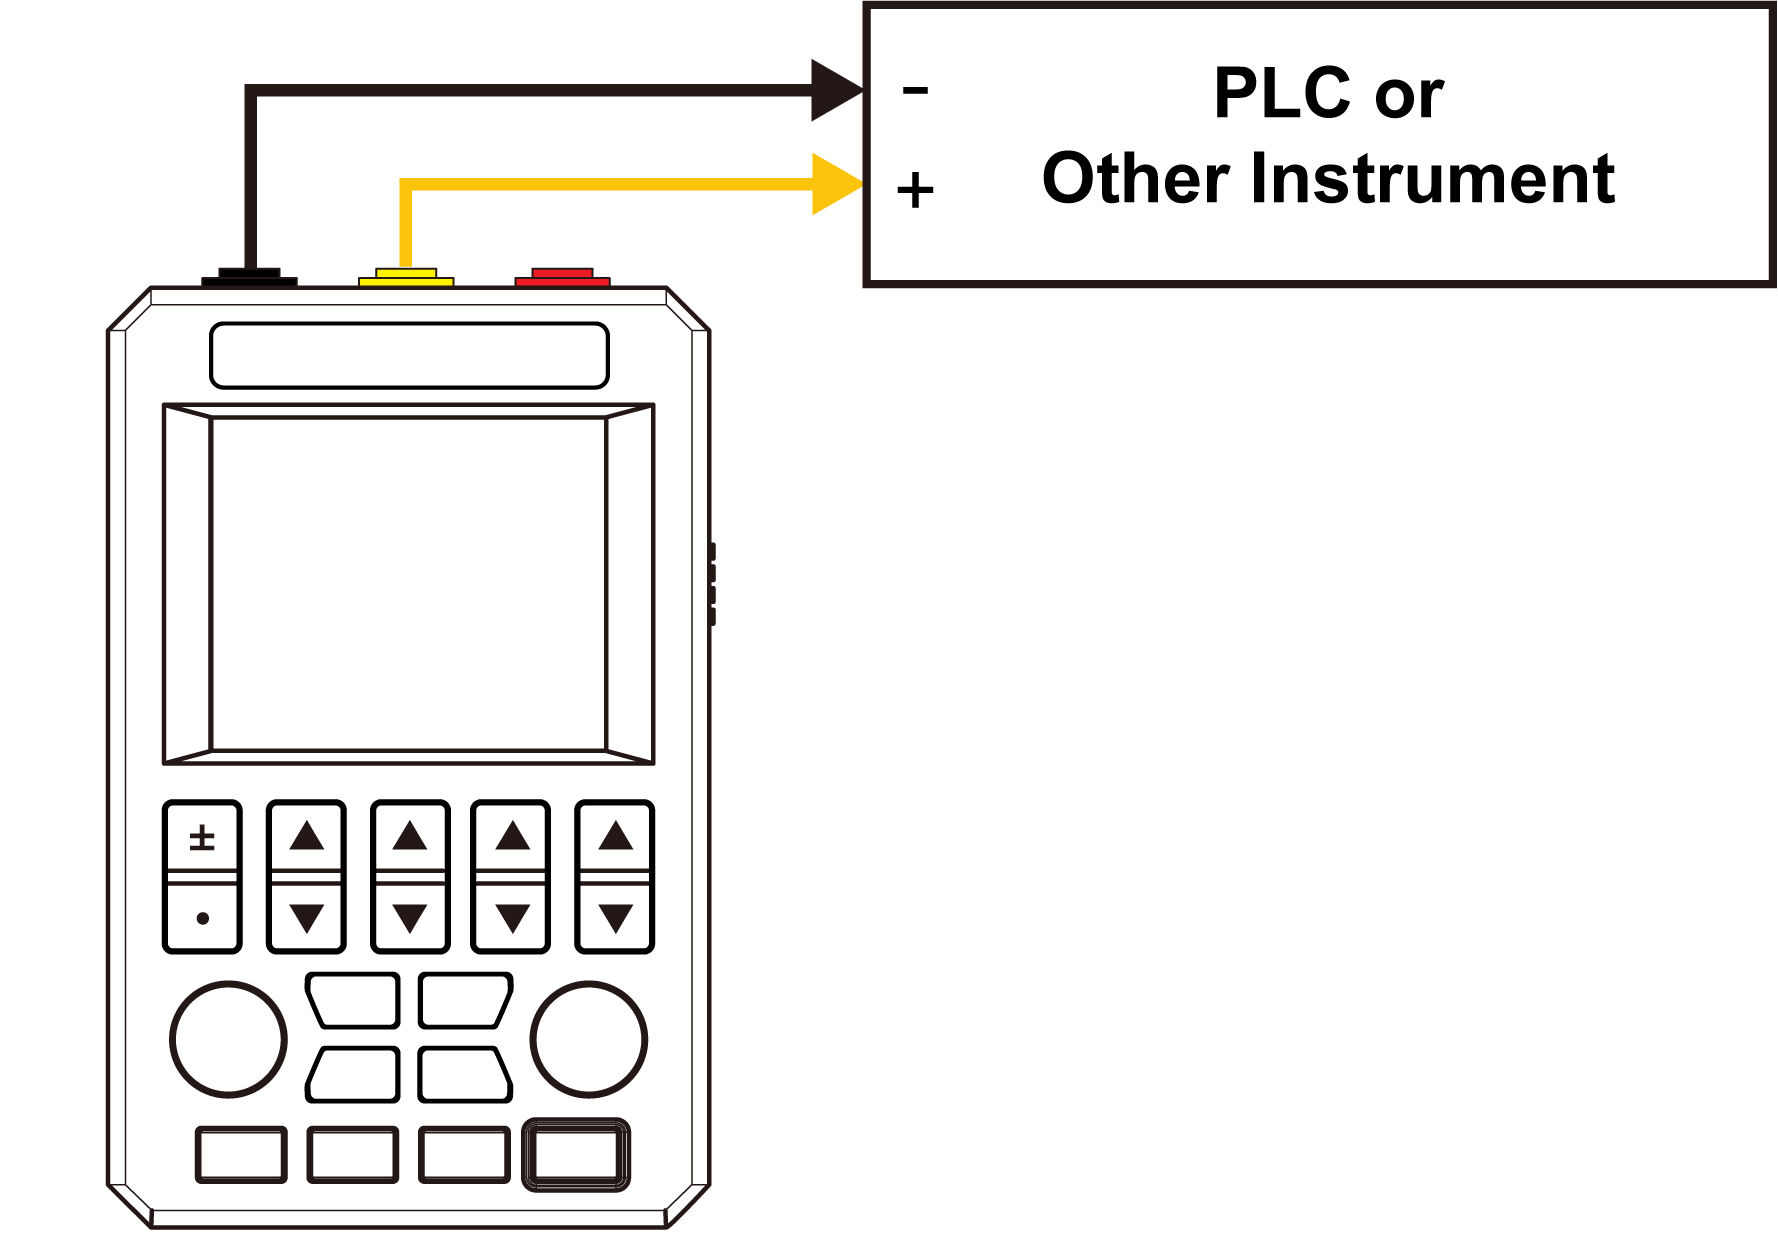 Figure 1: Output Active Current/Voltage to the meter or PLC